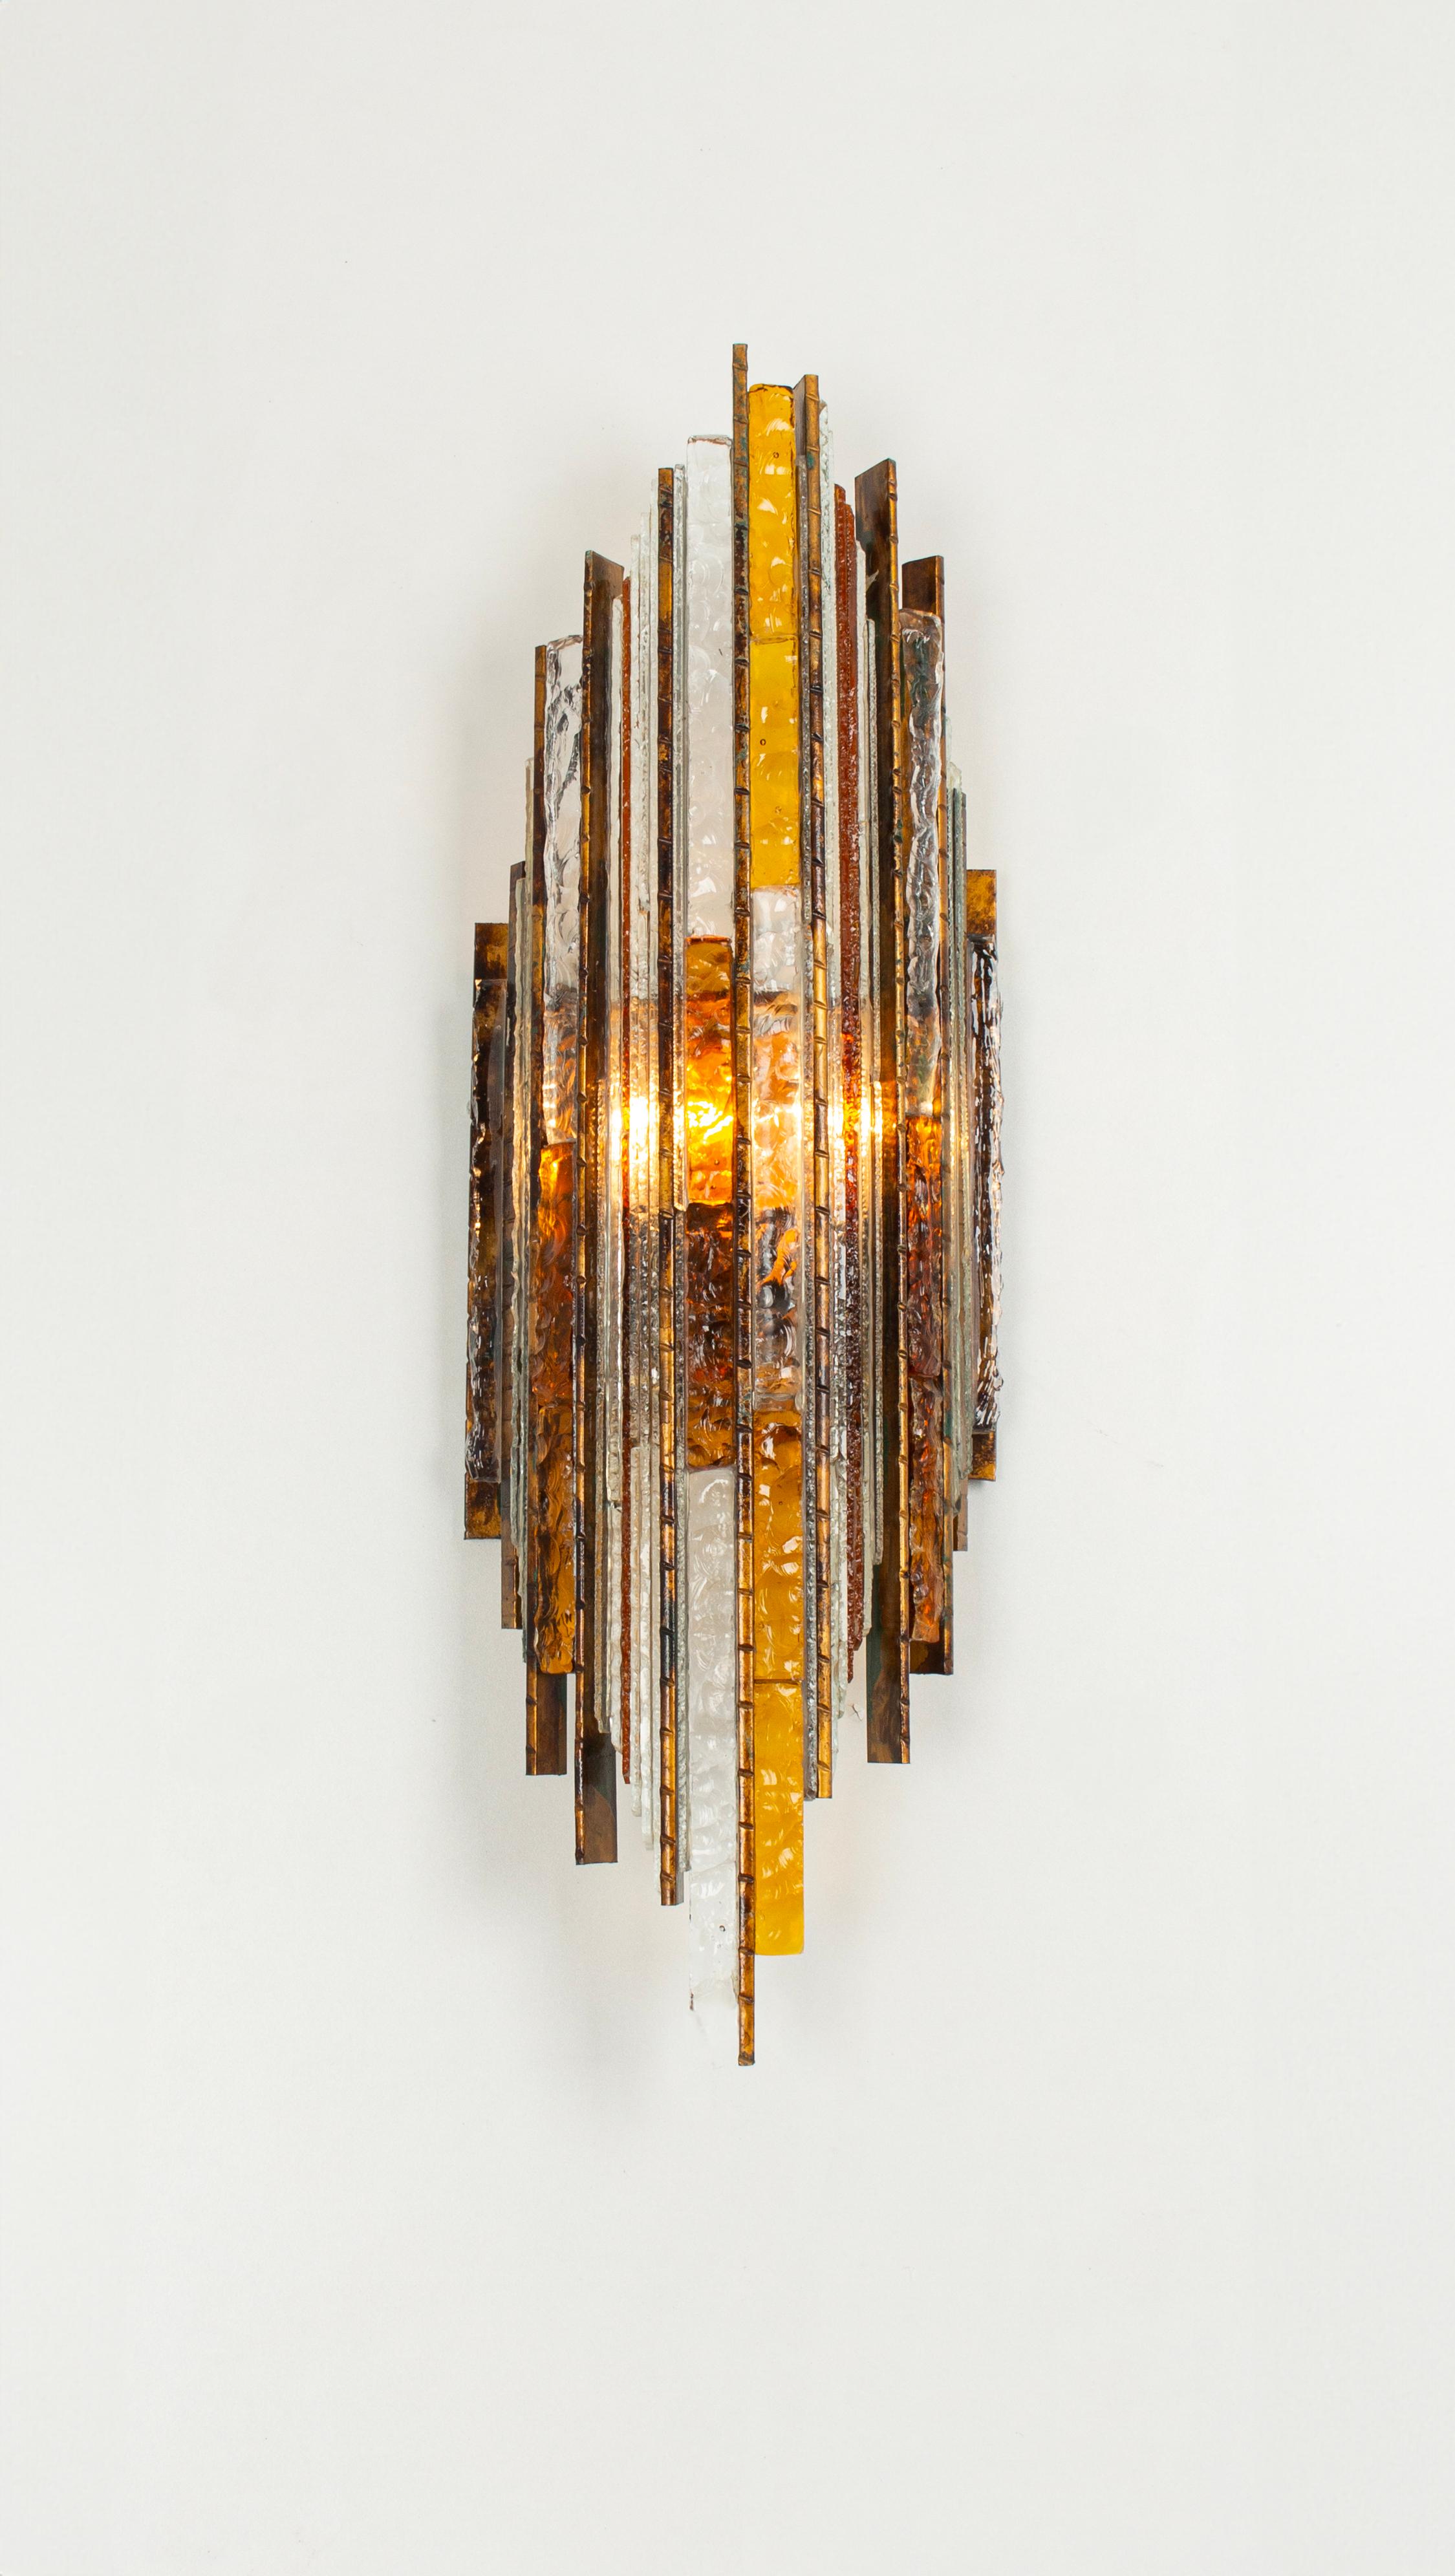 Brutalist mid-century wall sconce sconce by Albano Poli for Poliarte, 1970s
Poliarte Italy, sconce / wall applique, 1960s. Structure of iron with the surface in patina look, differently colored glass elements, with two light outlets.
Sockets: Two x